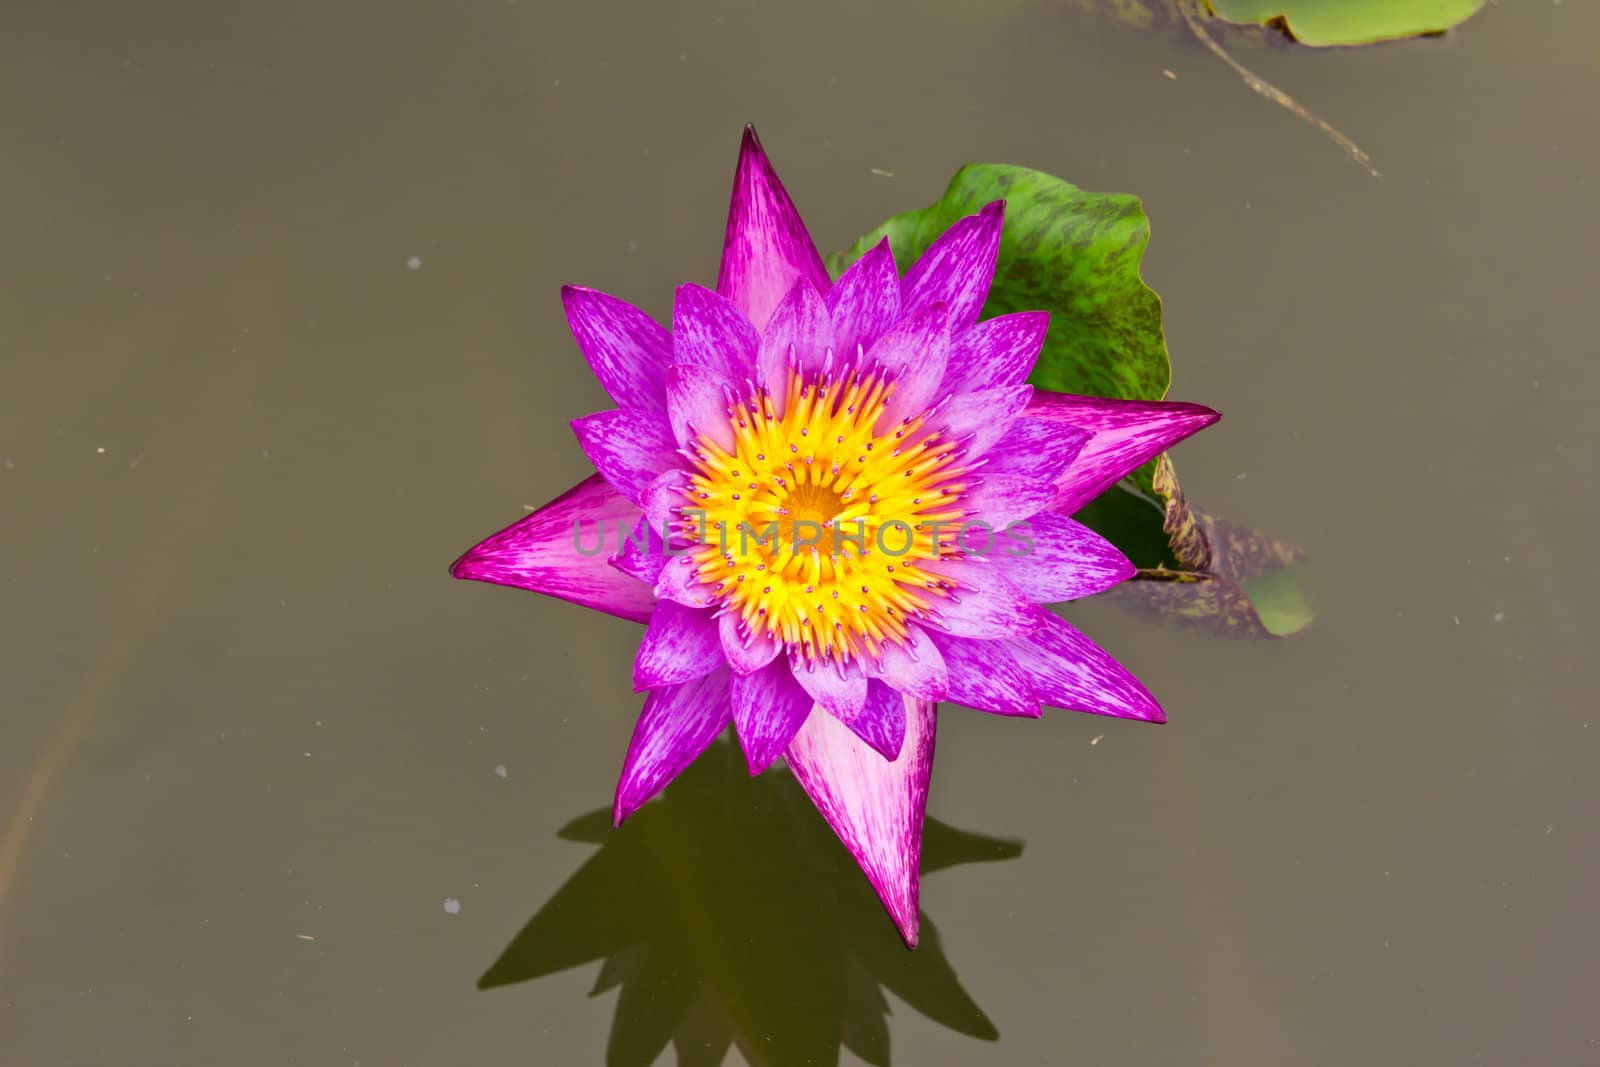 purple water lily in pond by tungphoto